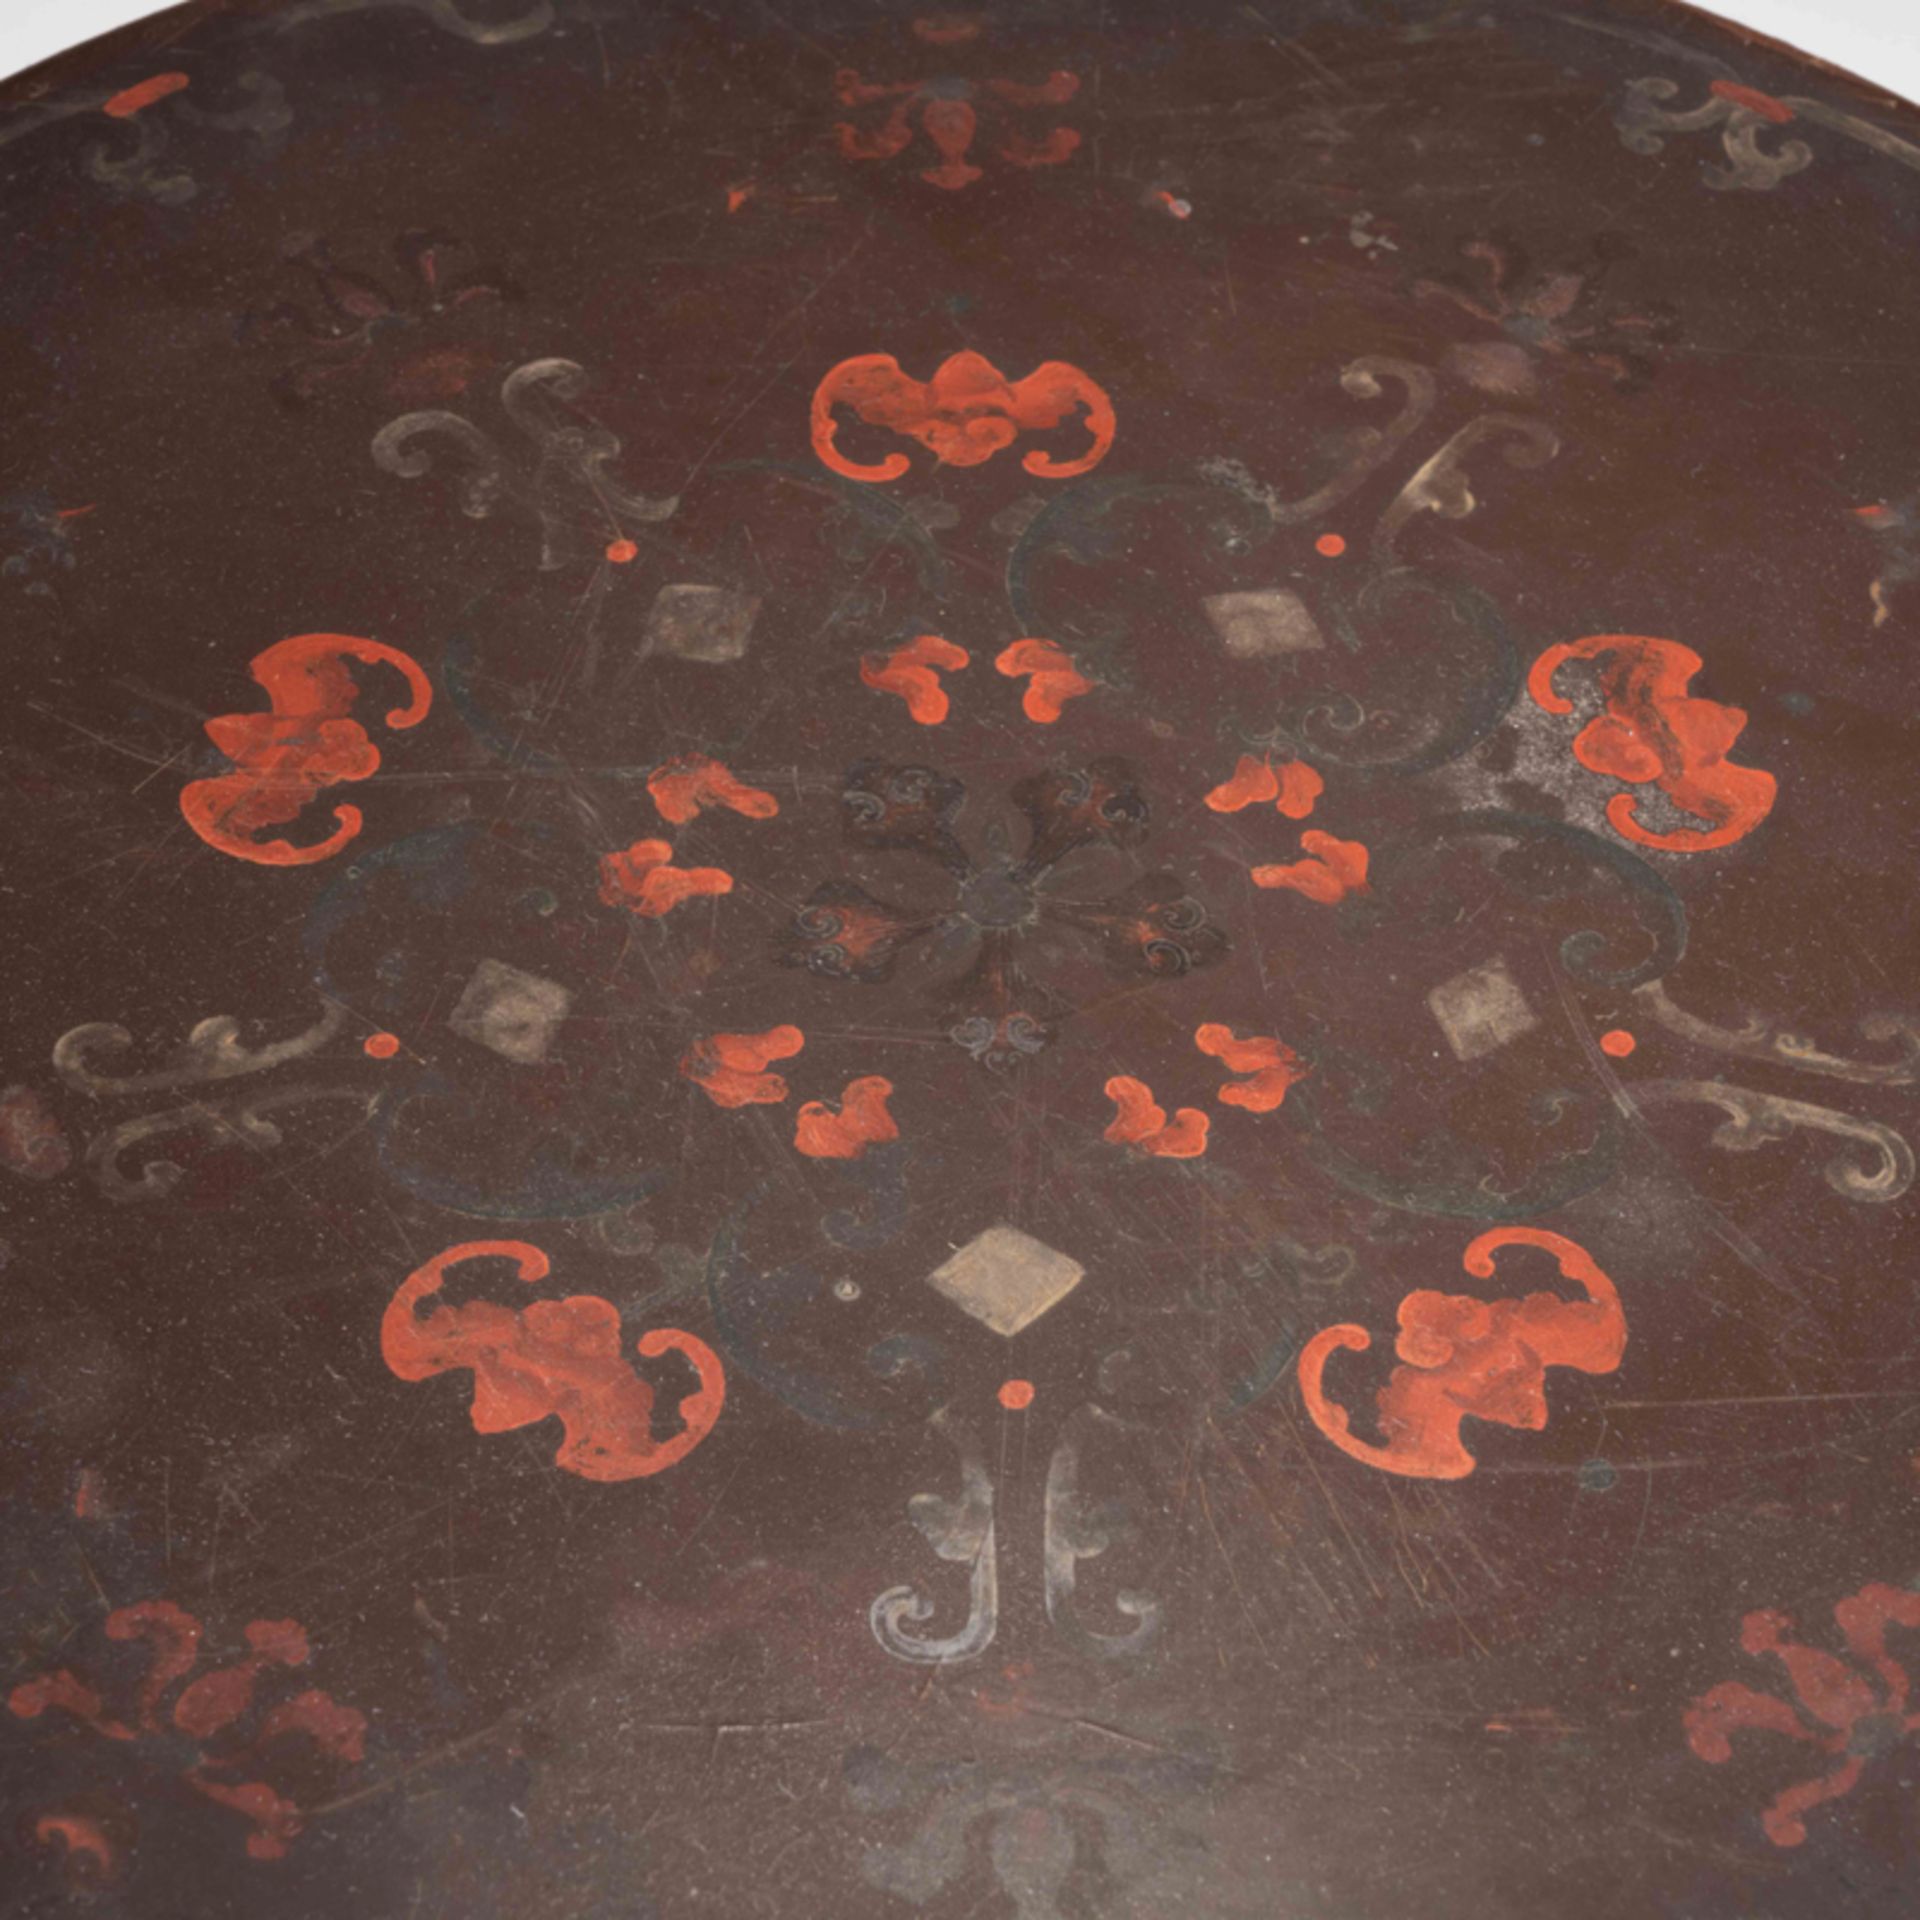 A LARGE CHINESE LACQUER BOX WITH PAINTED BAT DESIGN - Image 3 of 7